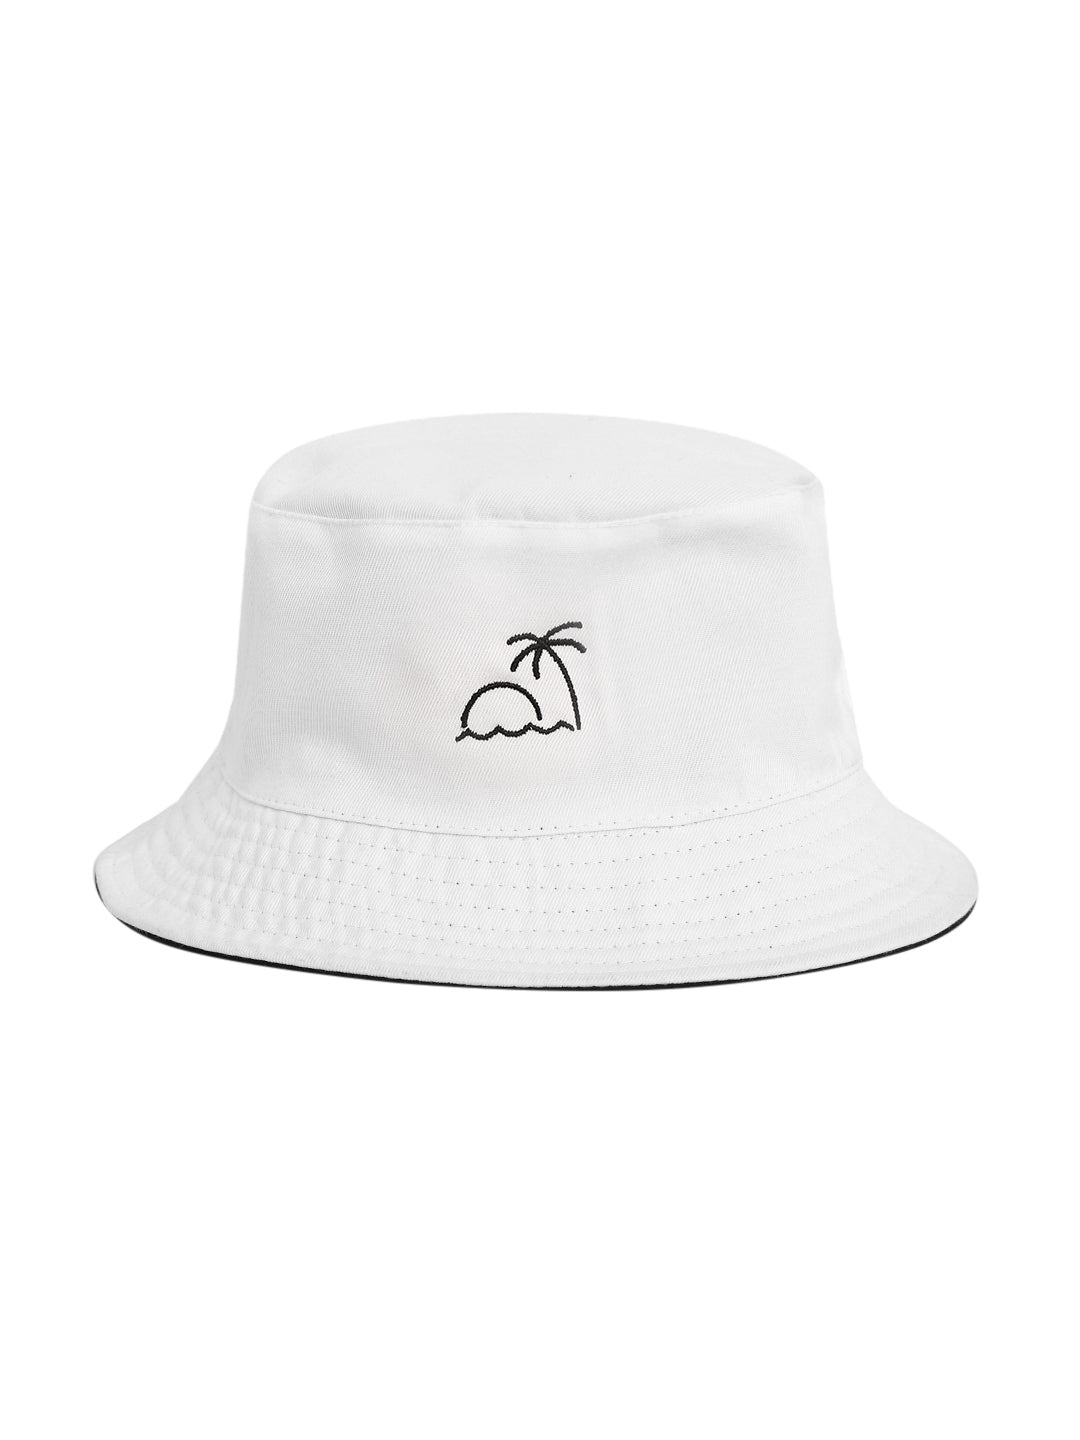 Blueberry black and white embroidery reversible bucket hat